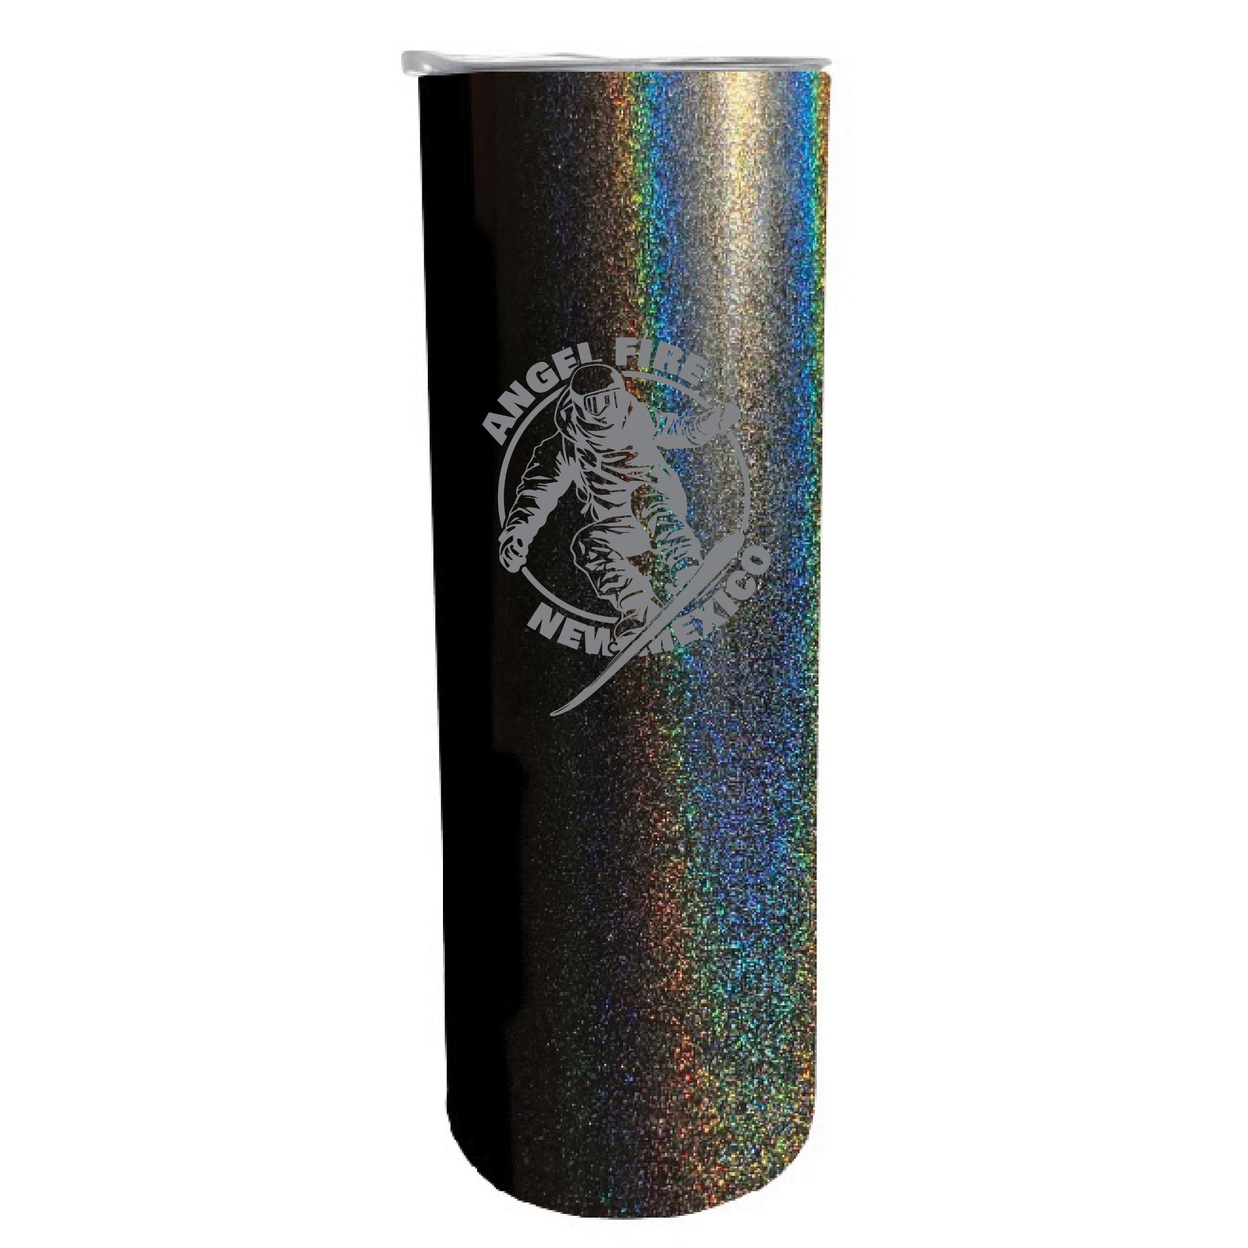 Angel Fire New Mexico Souvenir 20 Oz Engraved Insulated Stainless Steel Skinny Tumbler - Black Glitter,,Single Unit